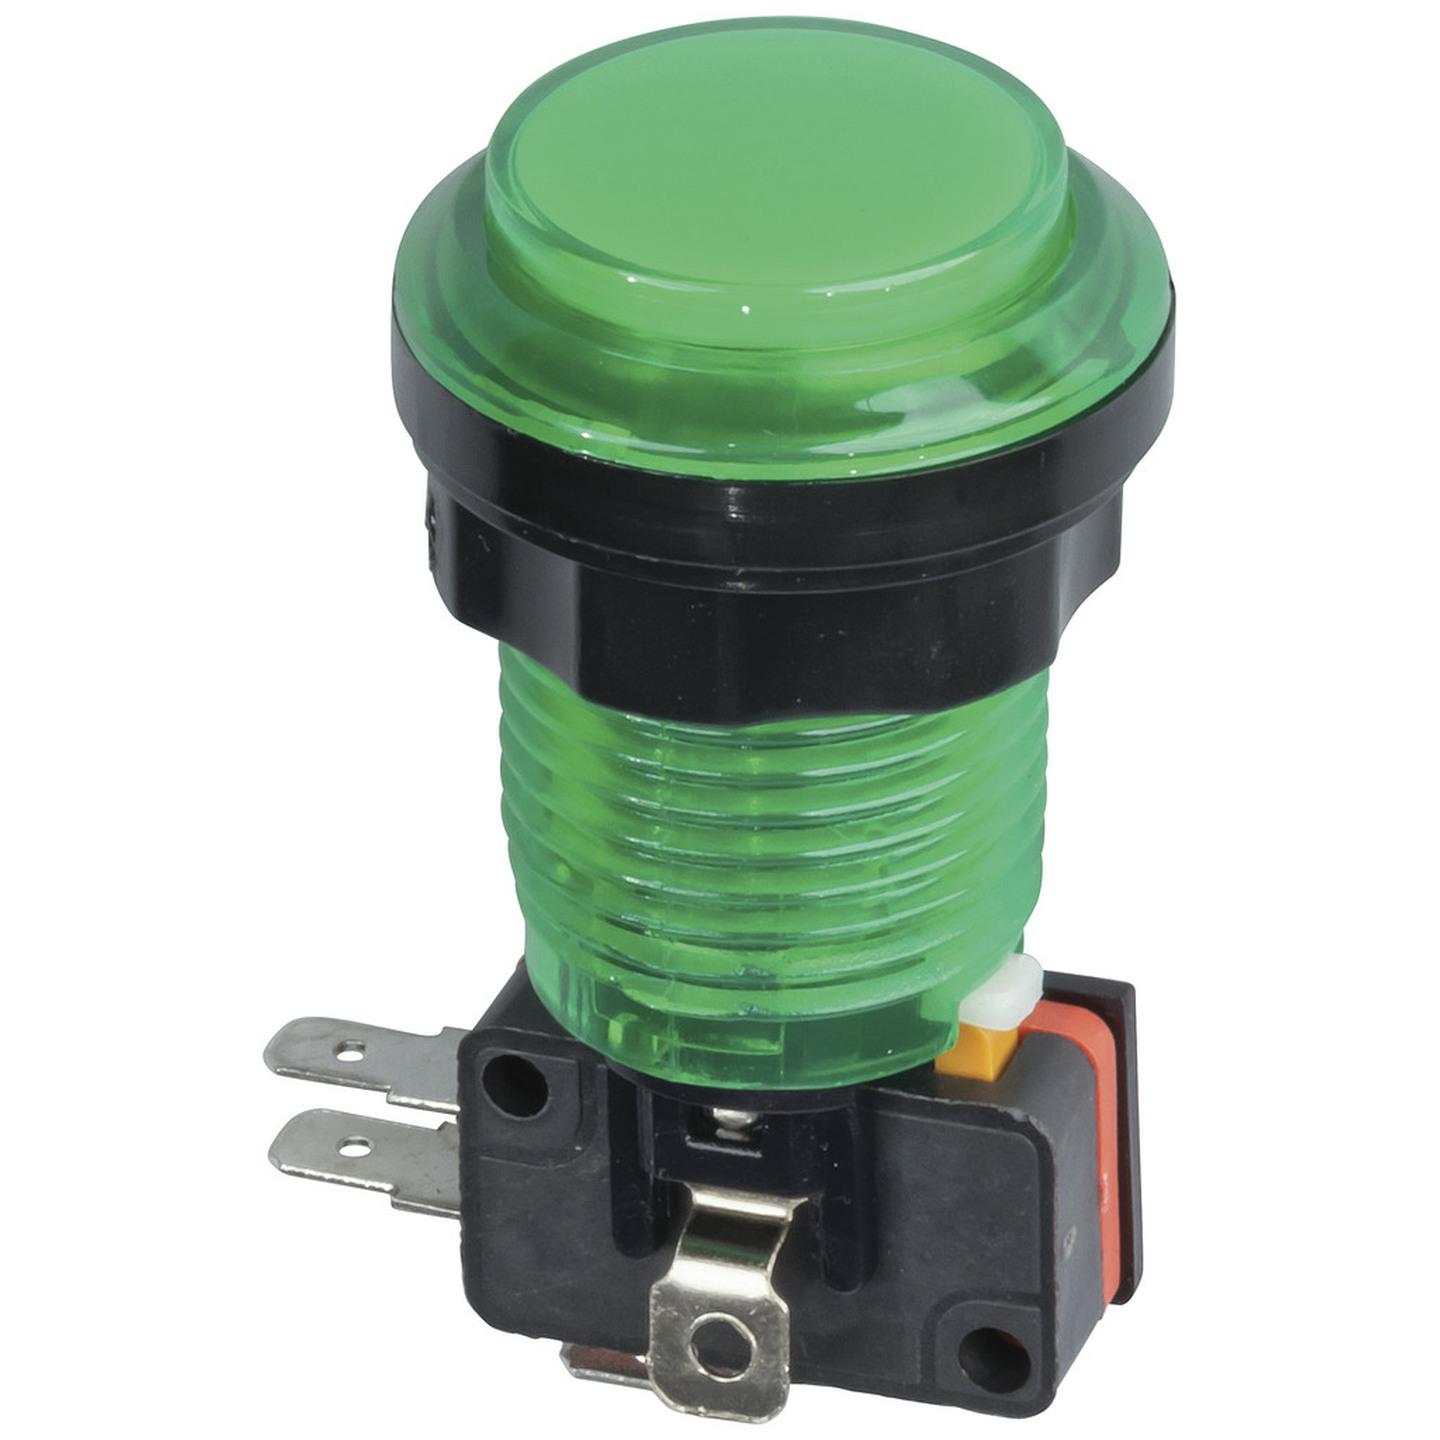 Green Arcade Button Switch with LED Illumination